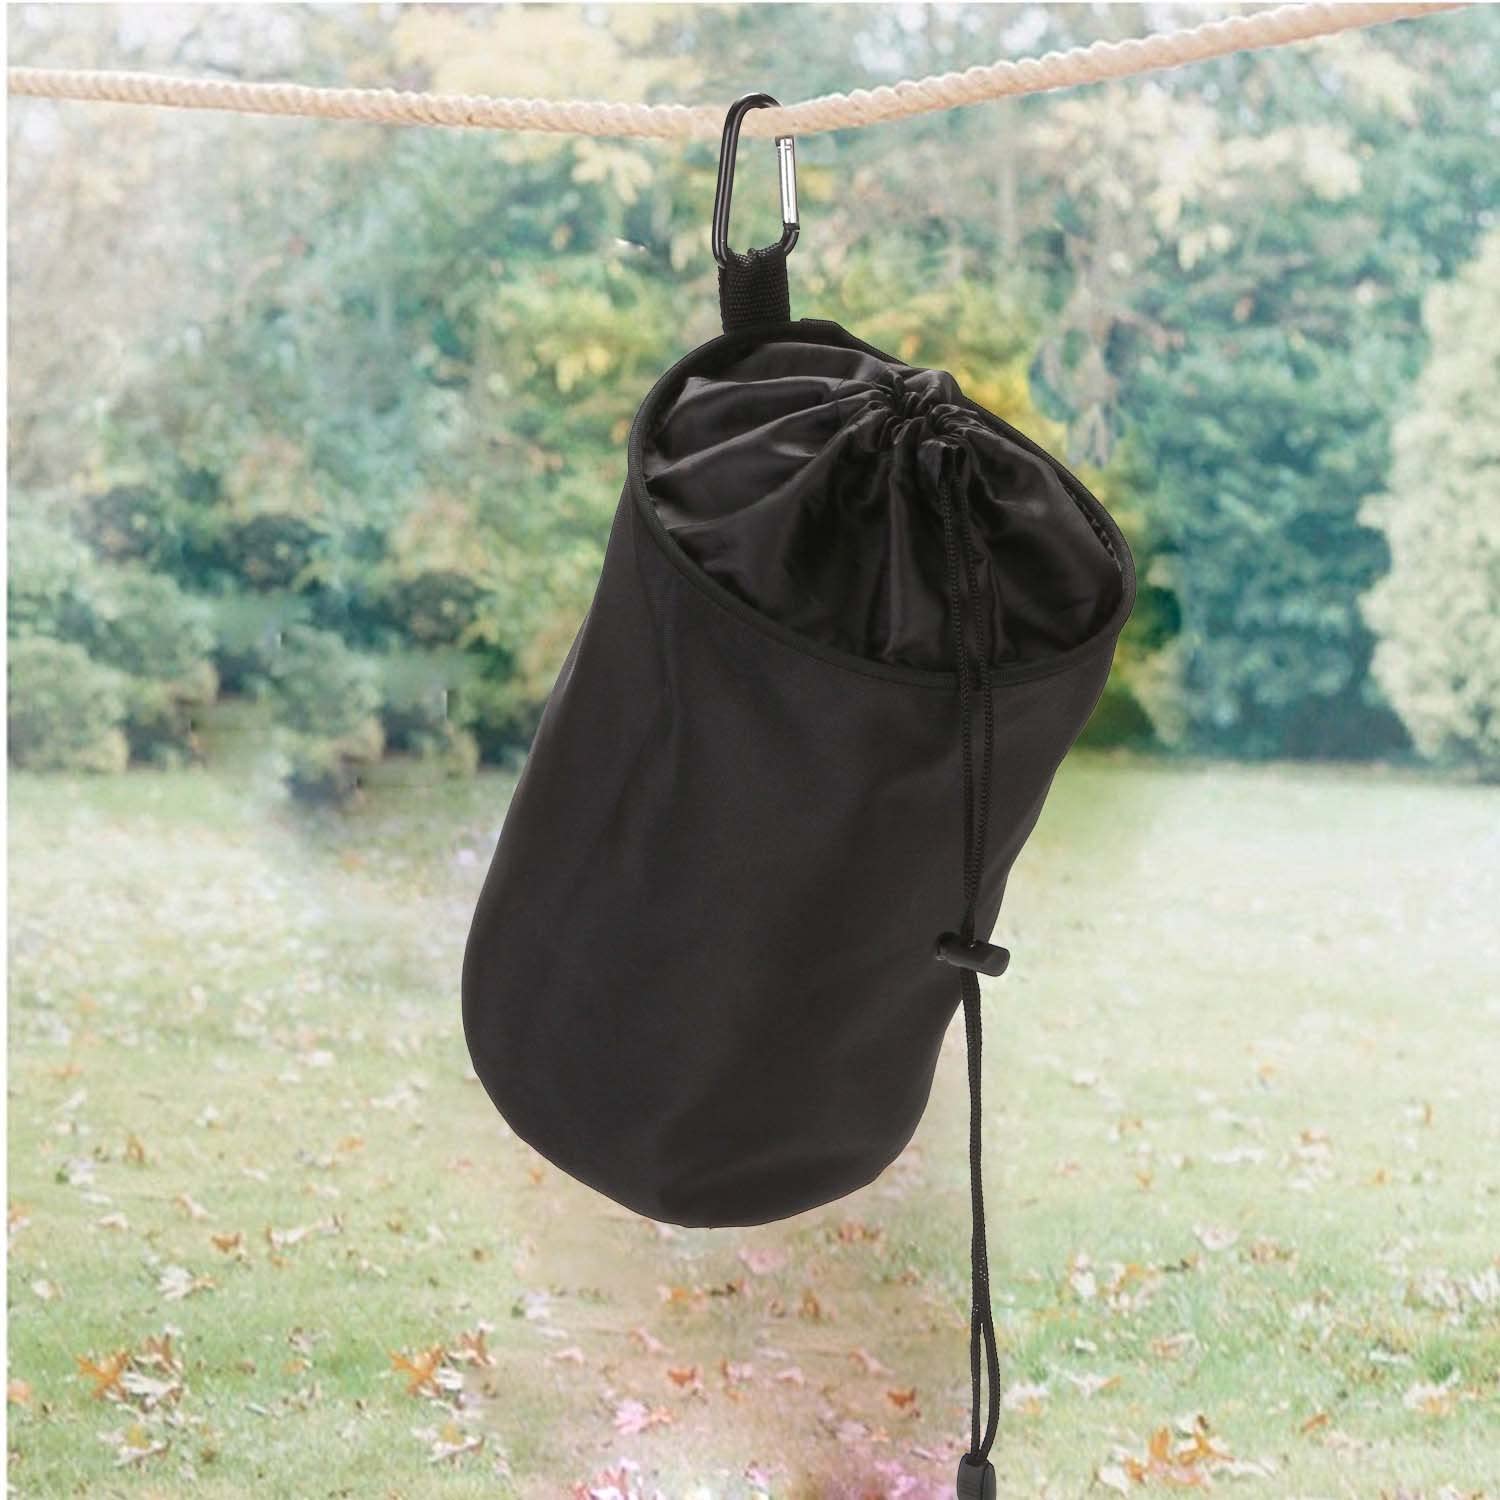 product shot of veamor clothespin bag a black cylindrical bag hanging from a clothesline outside with green grass visible in background